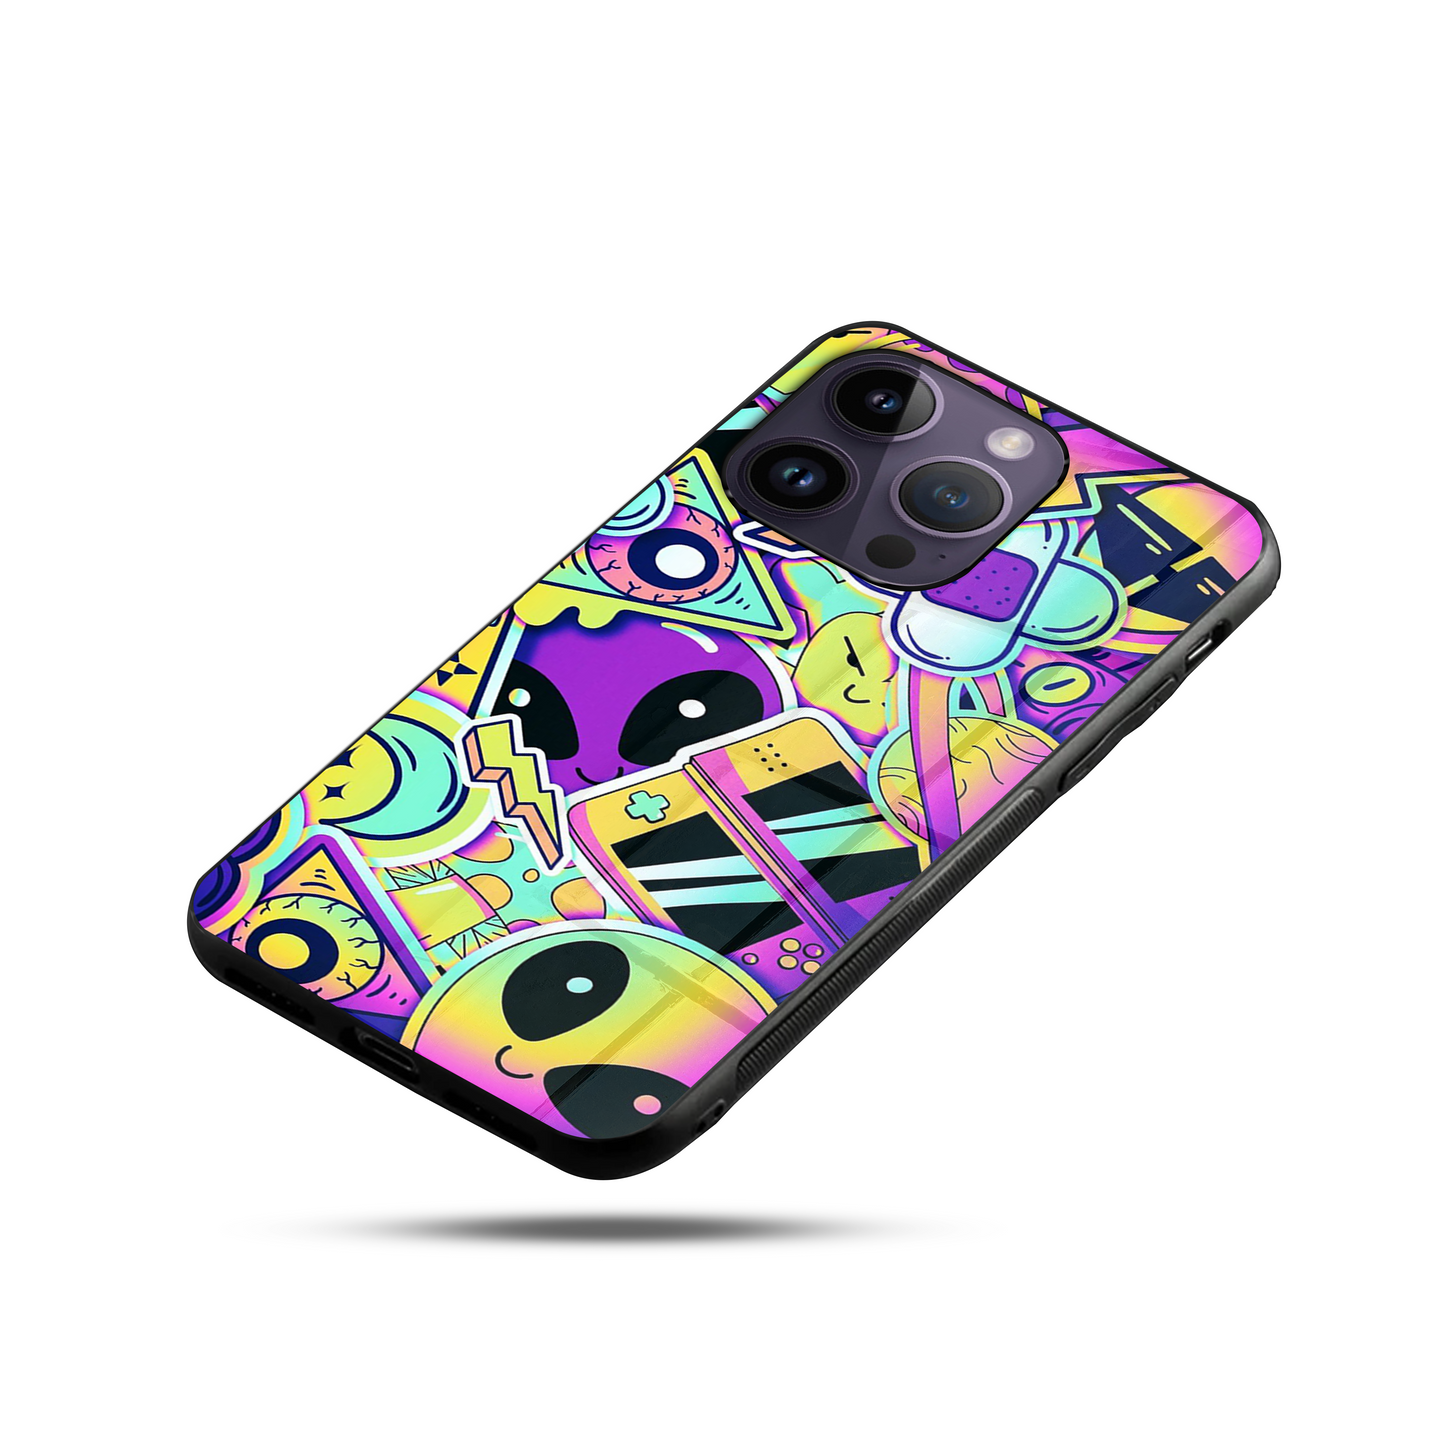 Spaced Out SuperGlass Case Cover